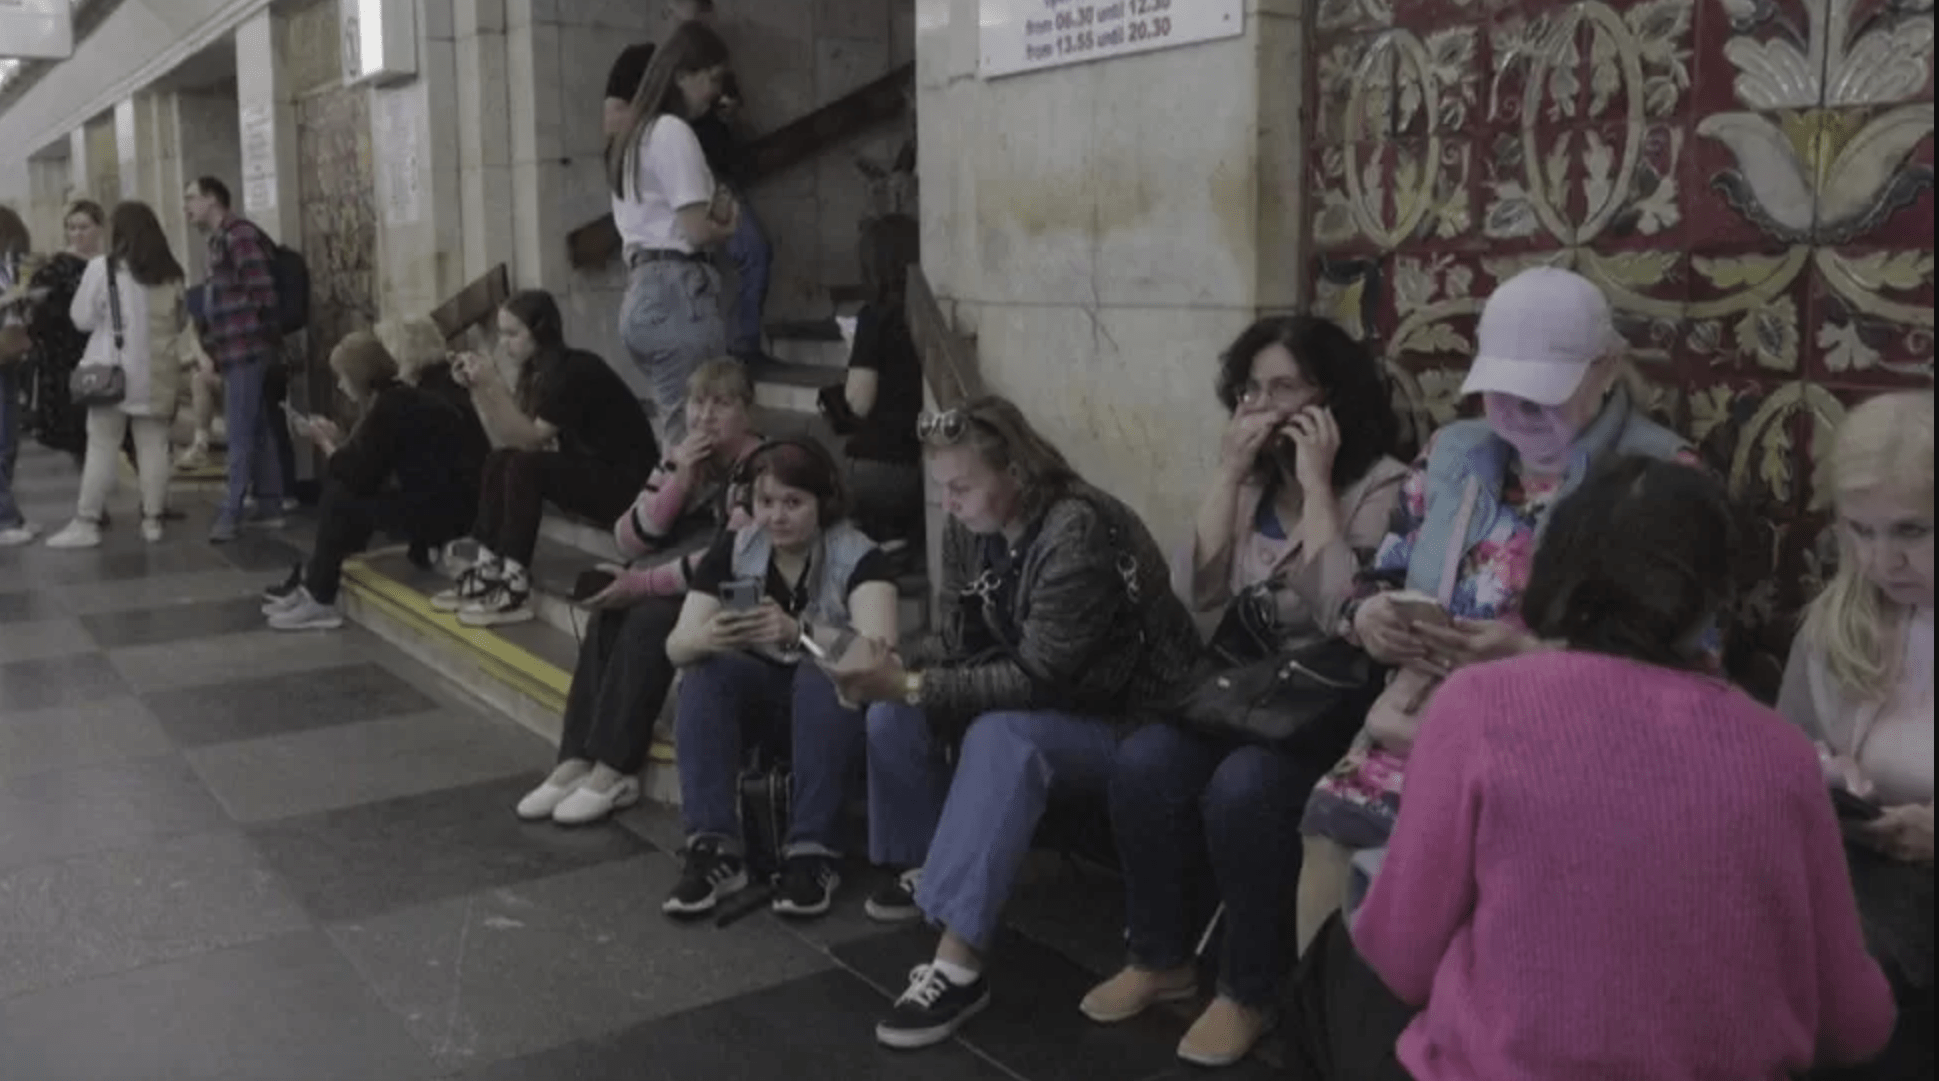 Kyiv residents take shelter in a metro station